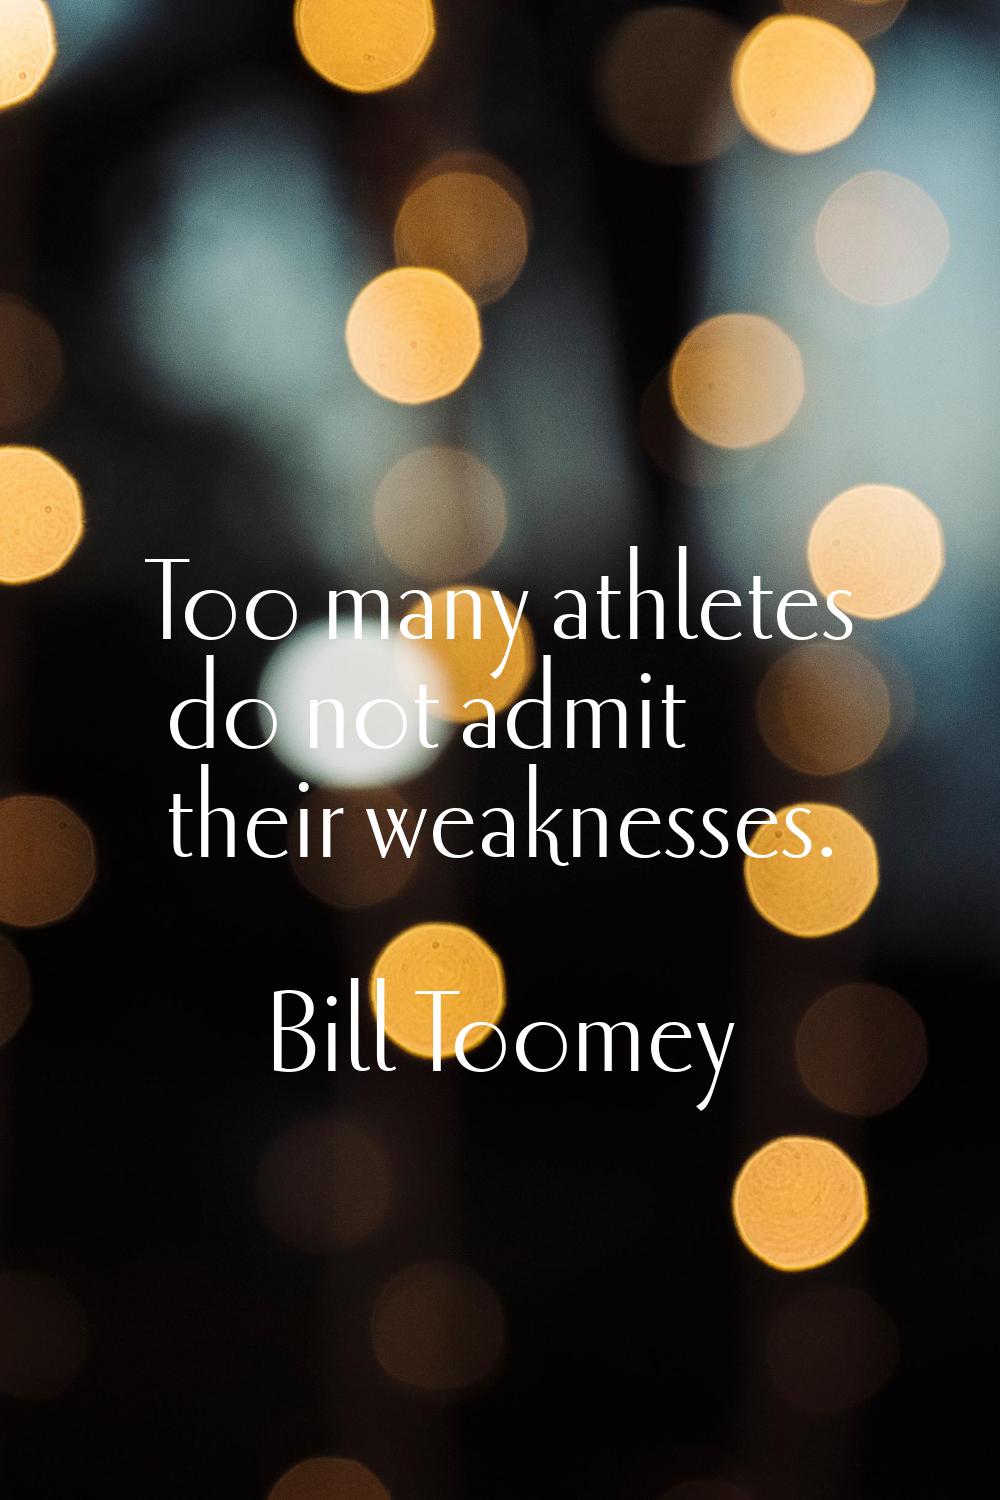 Too many athletes do not admit their weaknesses.